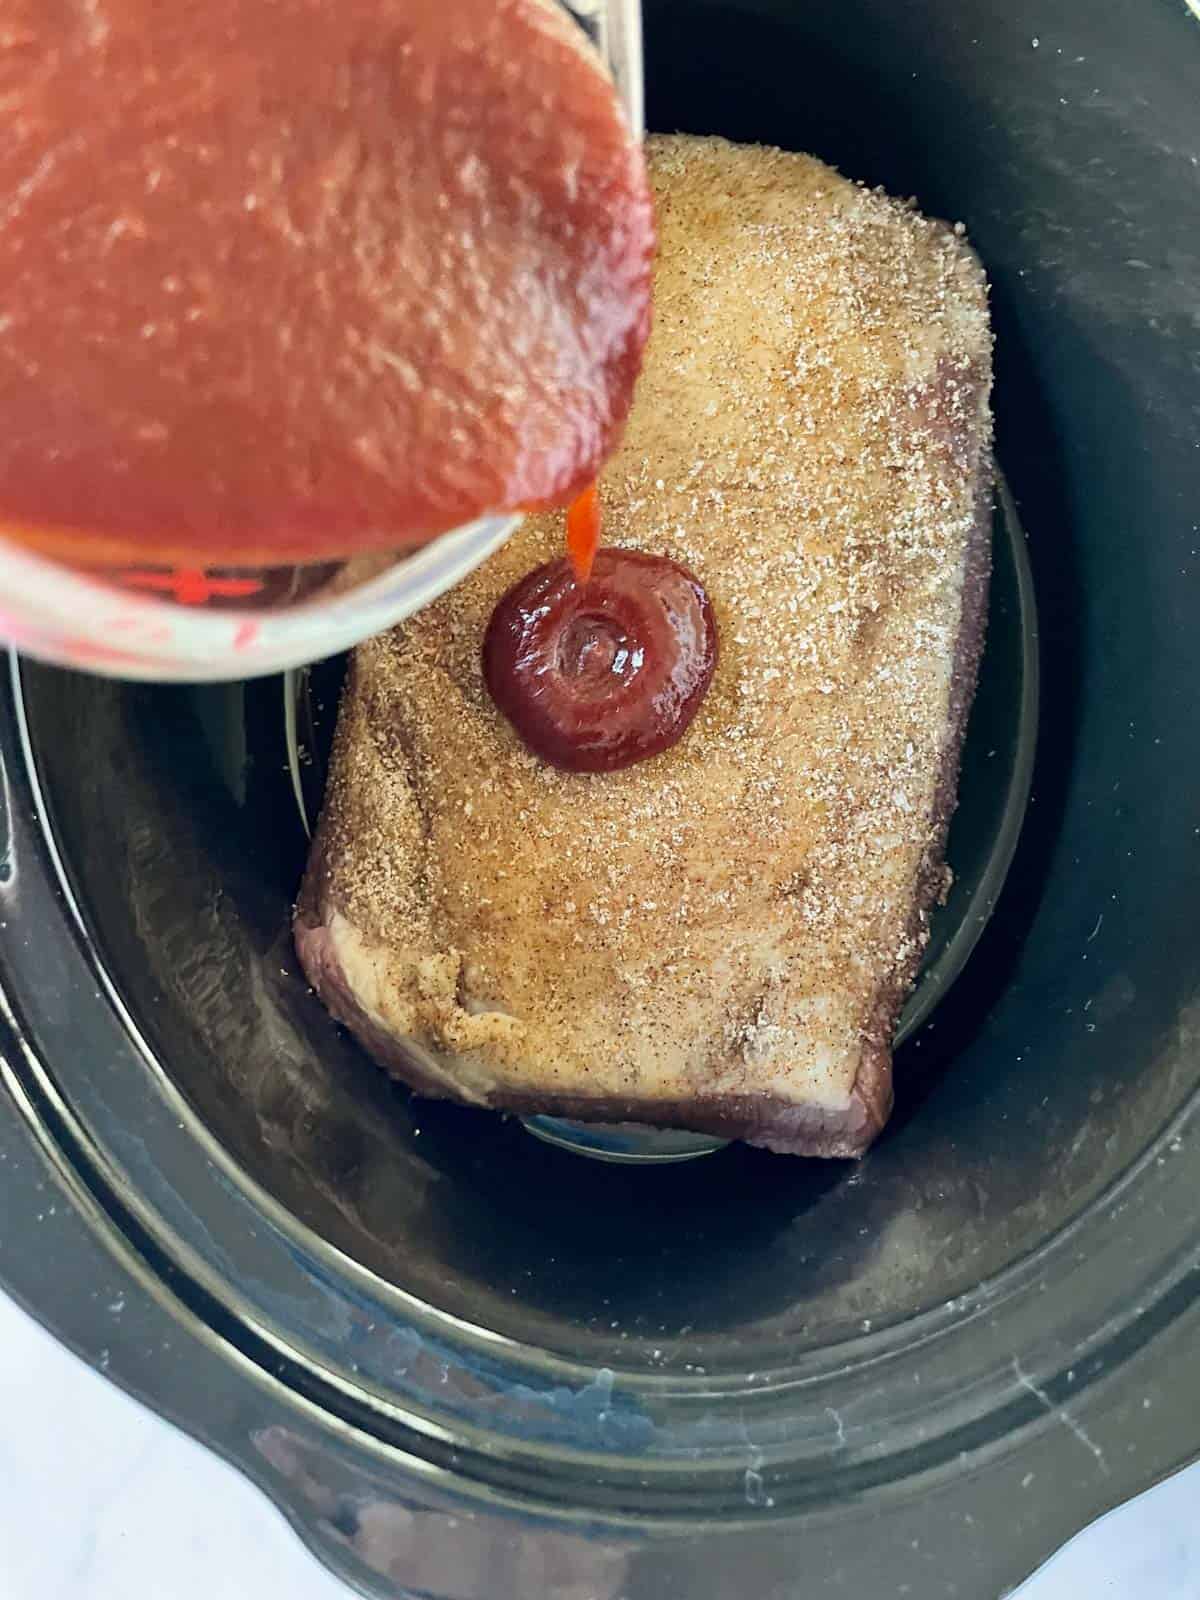 Pouring BBQ sauce over a spice rubbed brisket in a slow cooker.